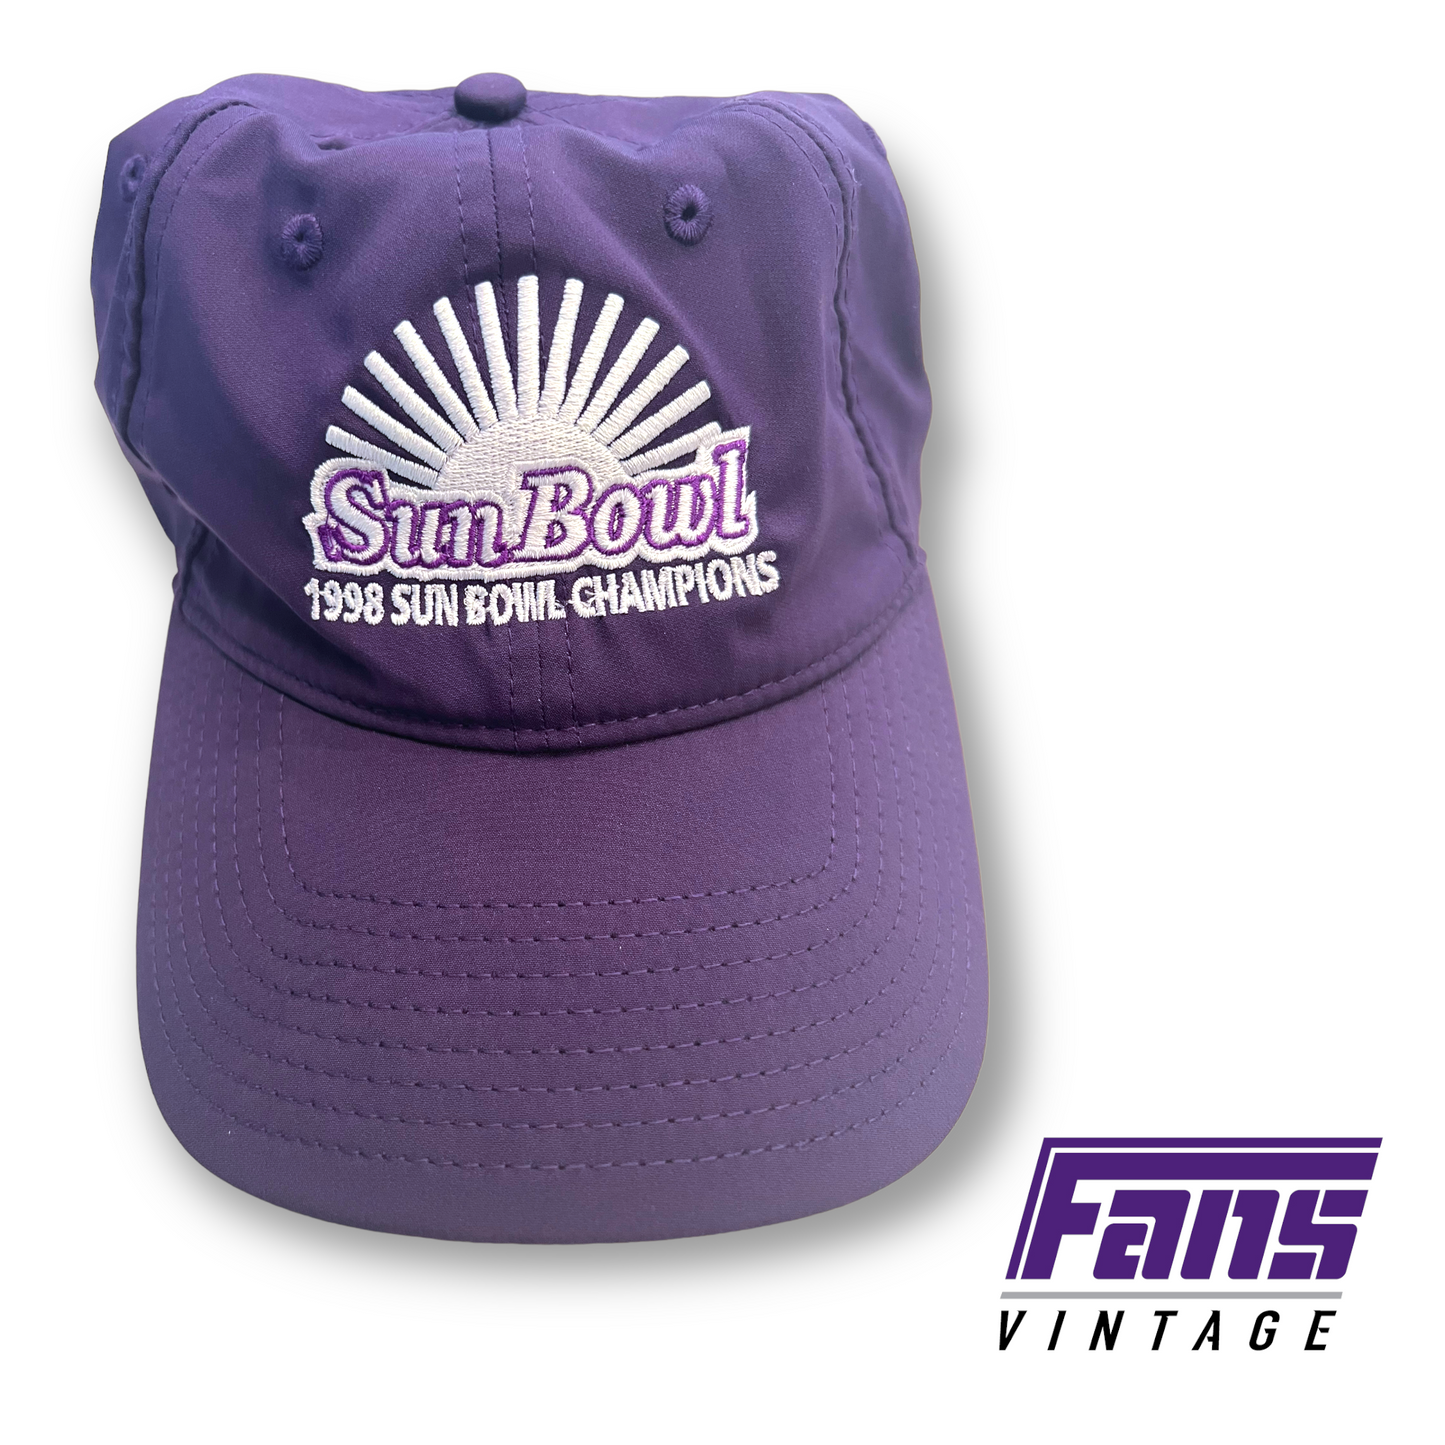 NEW with original tags! Vintage "The Game" 1998 TCU Sun Bowl Champions Hat